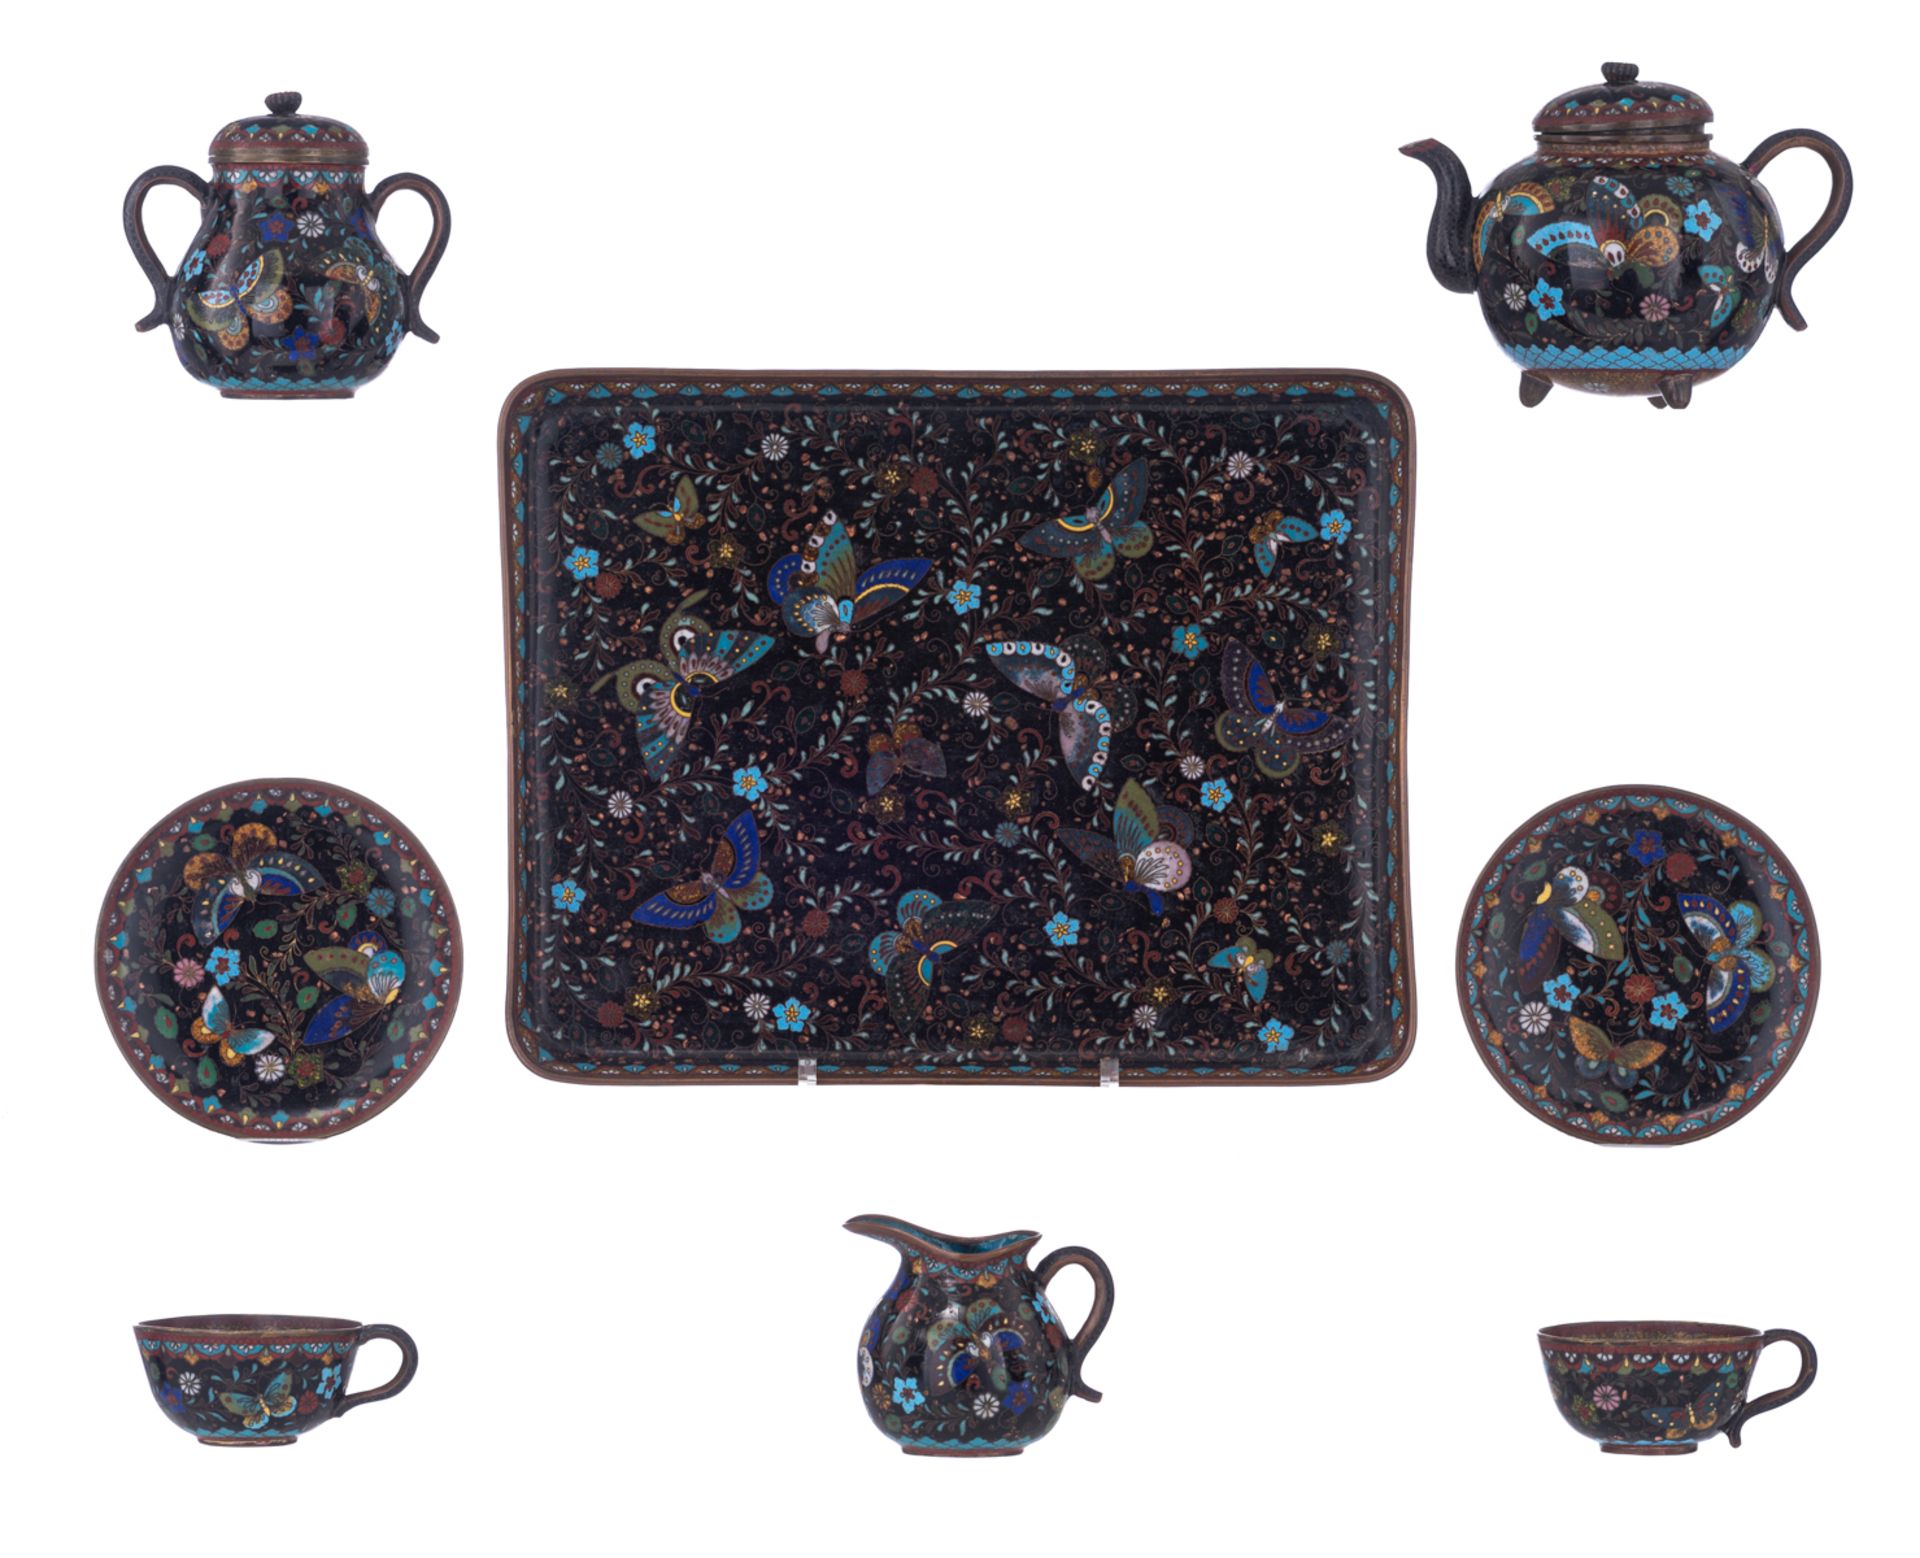 A Japanese cloisonné enamel tea set, i.e. a tray, two cups and saucers, a teapot and cover, a milk j